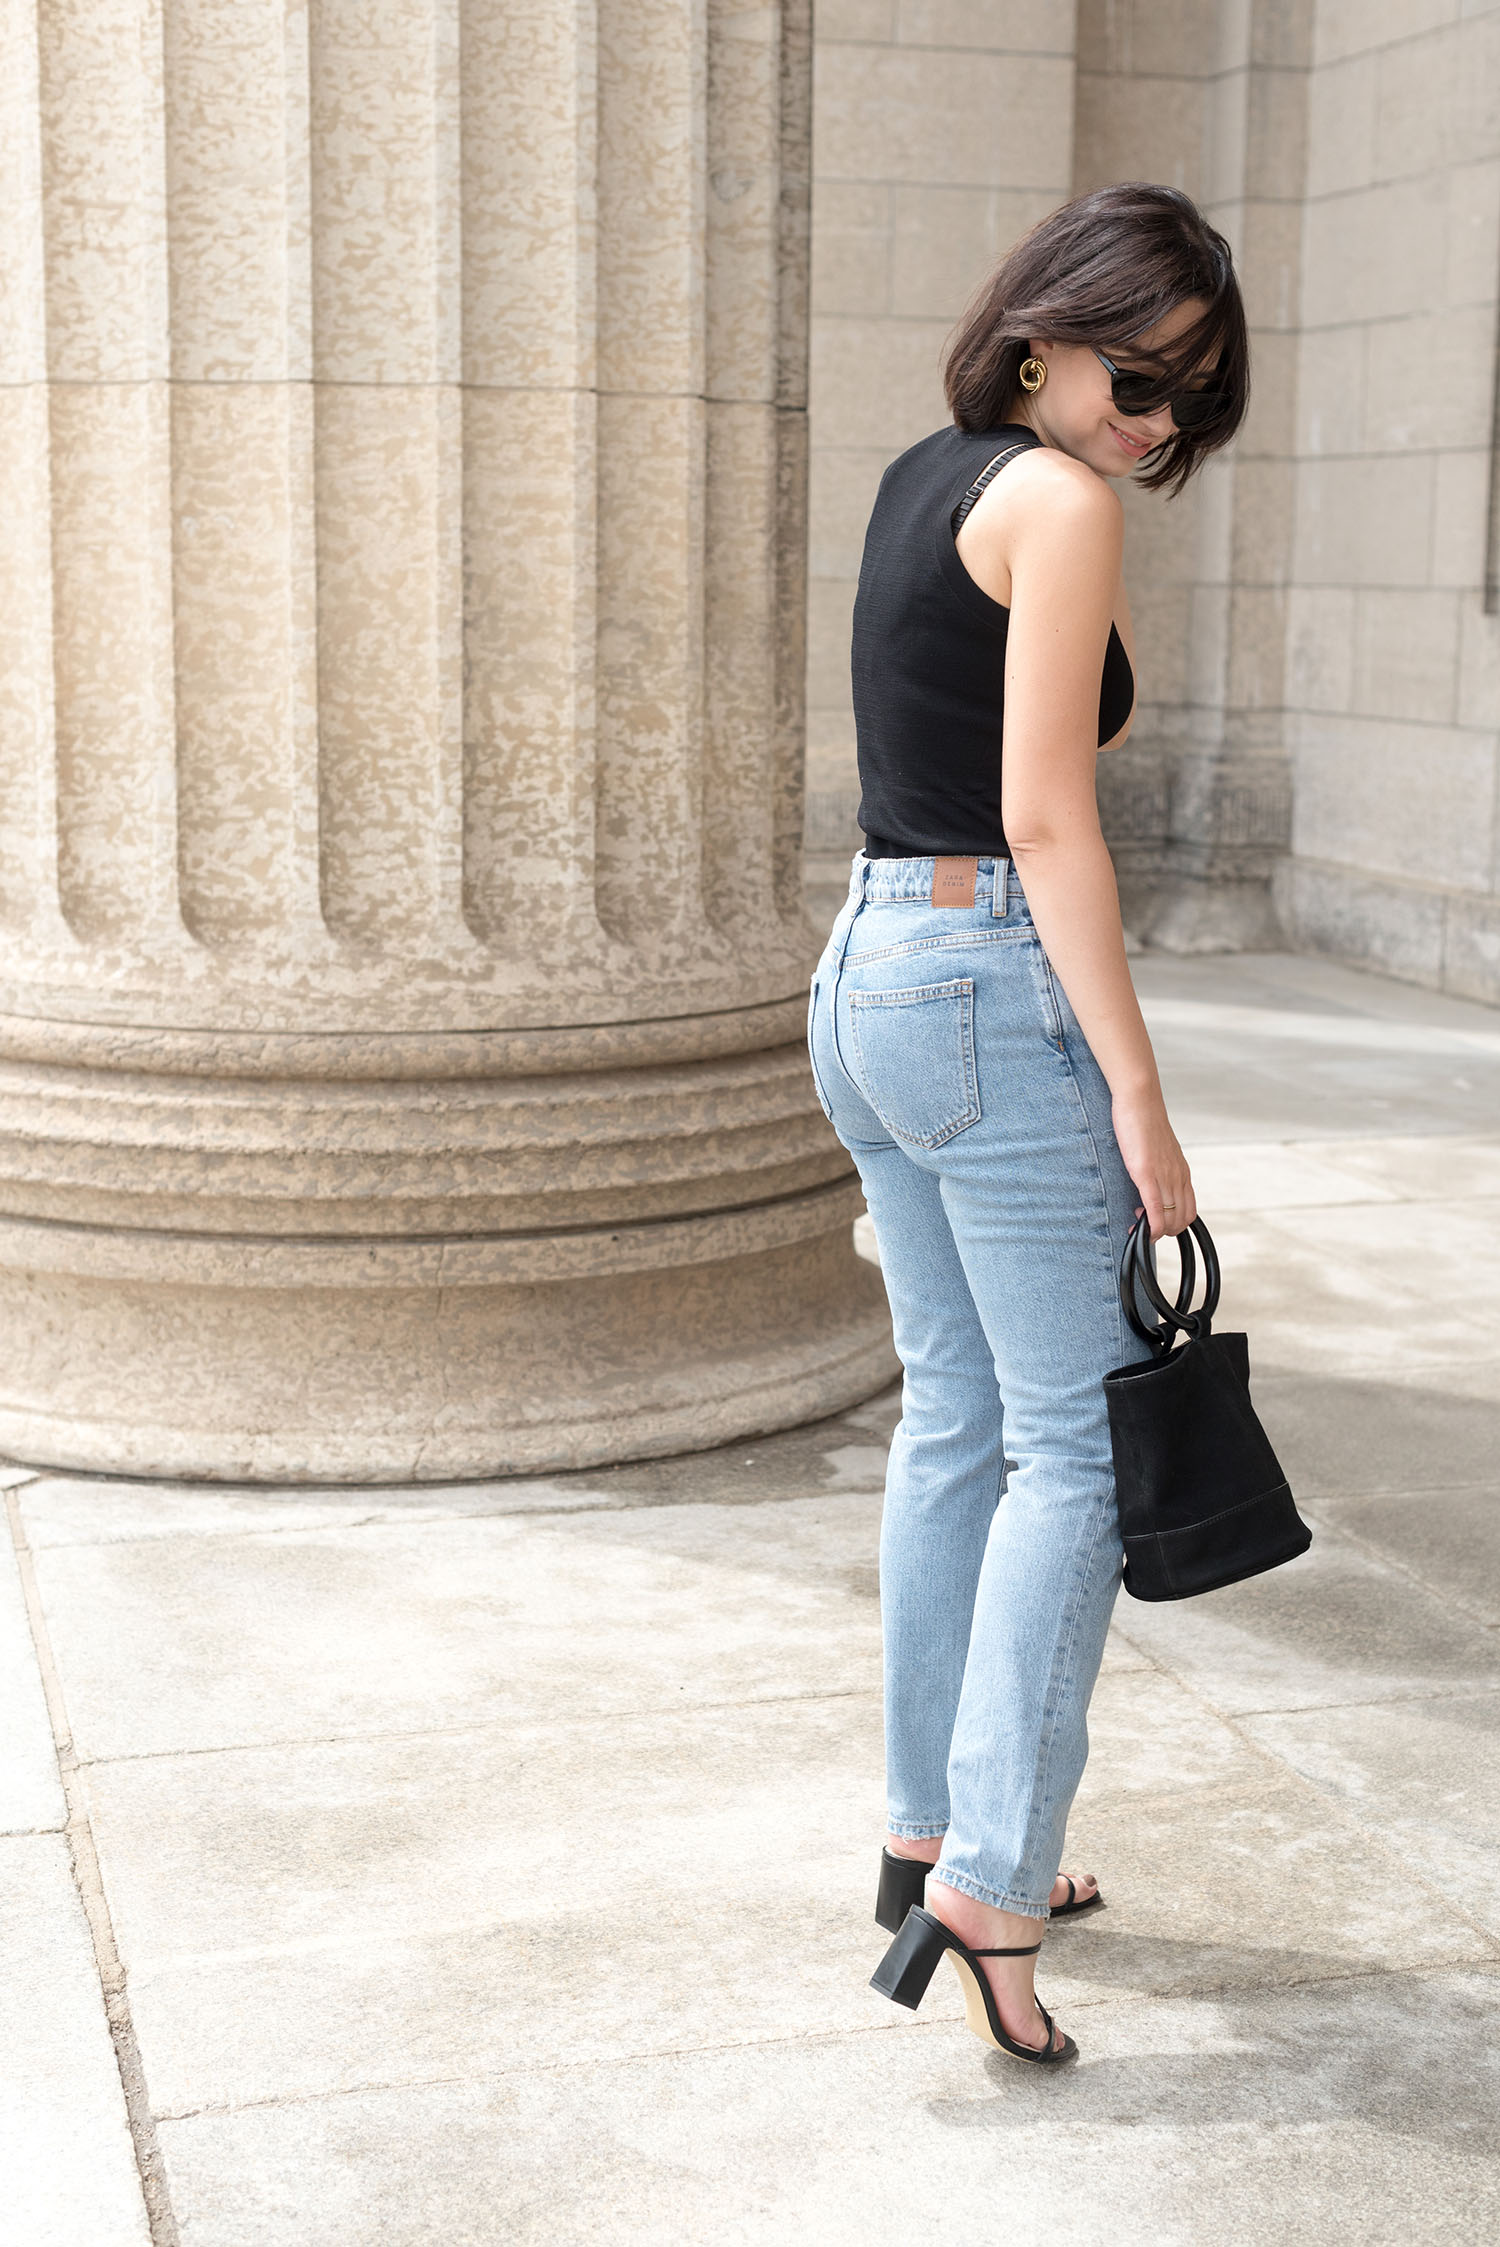 Top Winnipeg fashion blogger Cee Fardoe of Coco & Vera talks about feeling a disconnect in friendships and wears Zara mom jeans and carries a Looks Like Summer handbag 